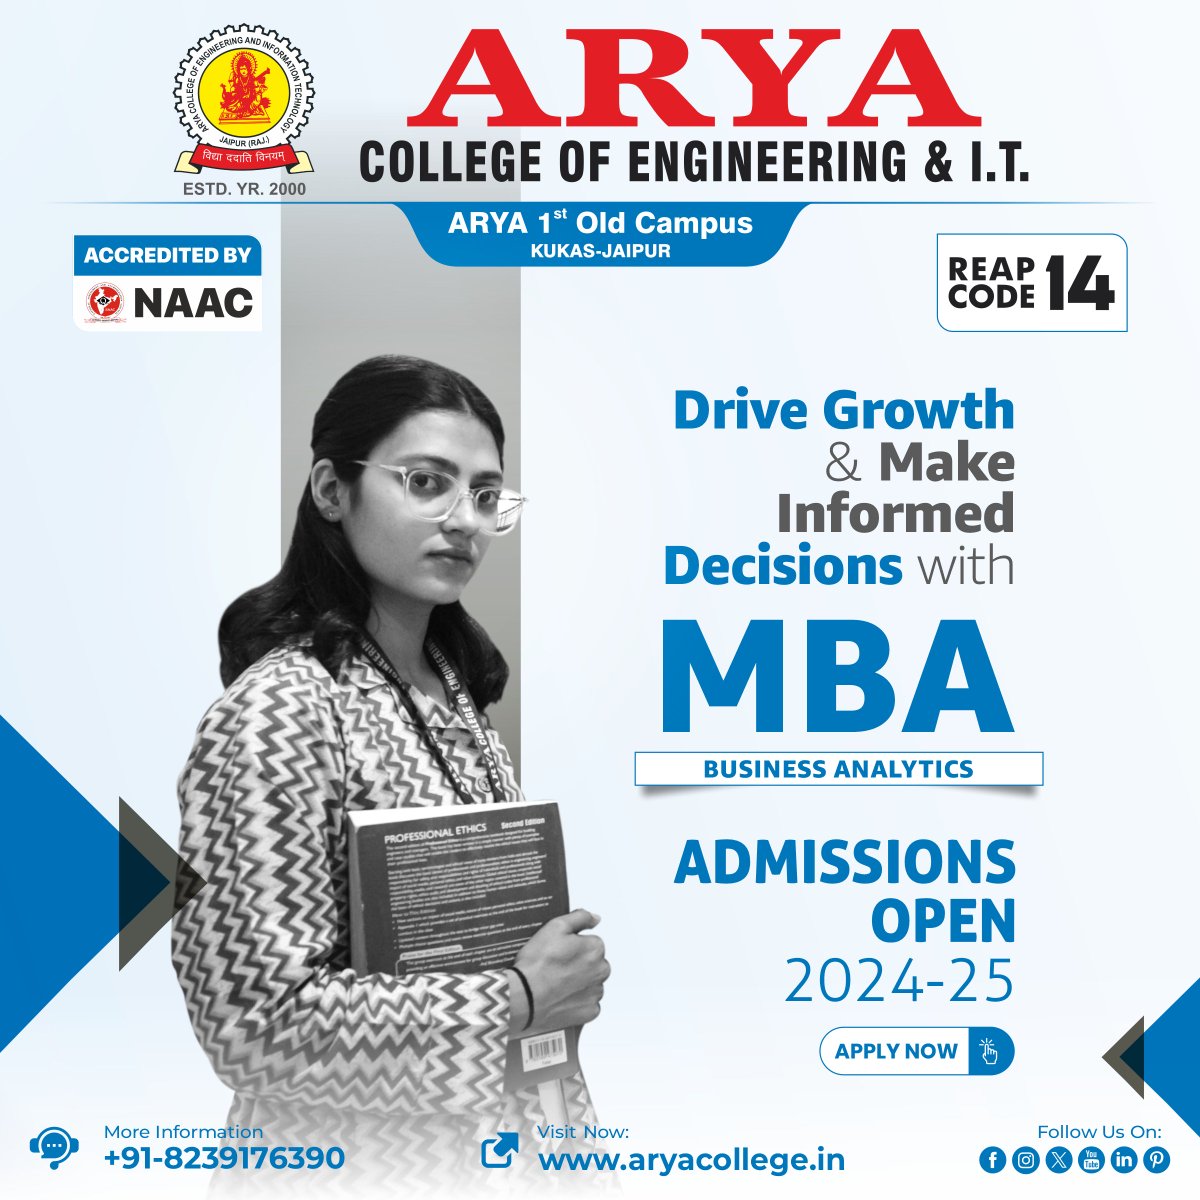 Transform your career trajectory with our #MBA program tailored specifically for aspiring business analysts. Gain the critical skills to drive growth and make data-driven decisions that propel organizations forward.

#AdmissionsOpen2024 #ApplyToday #AryaCollege #MBAProgram #ACEIT